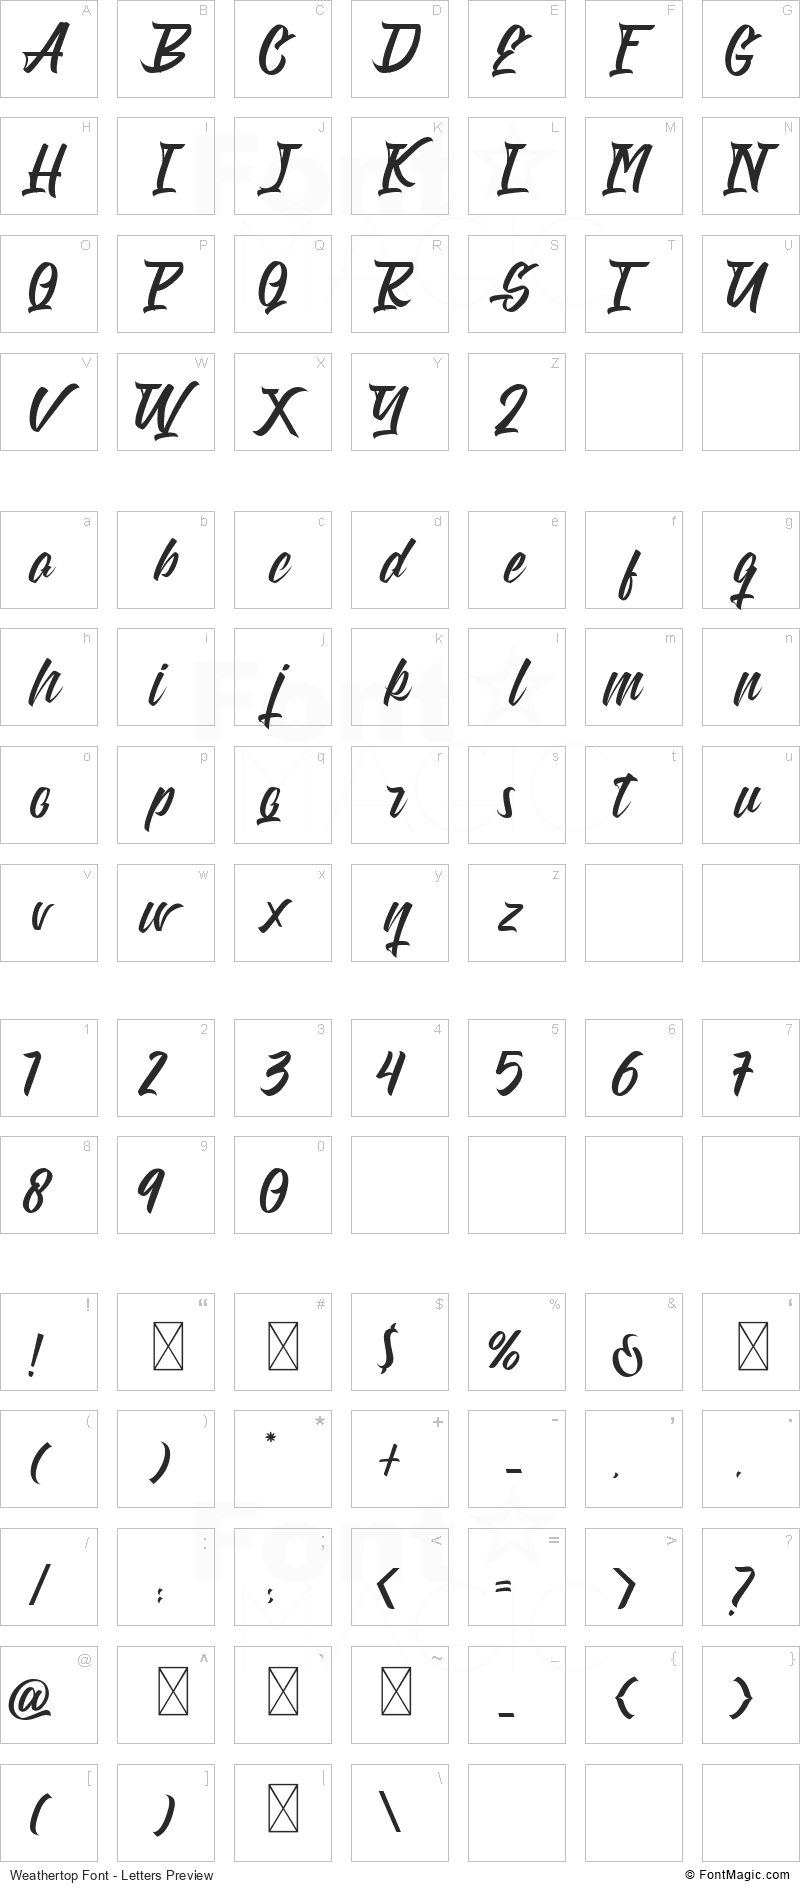 Weathertop Font - All Latters Preview Chart